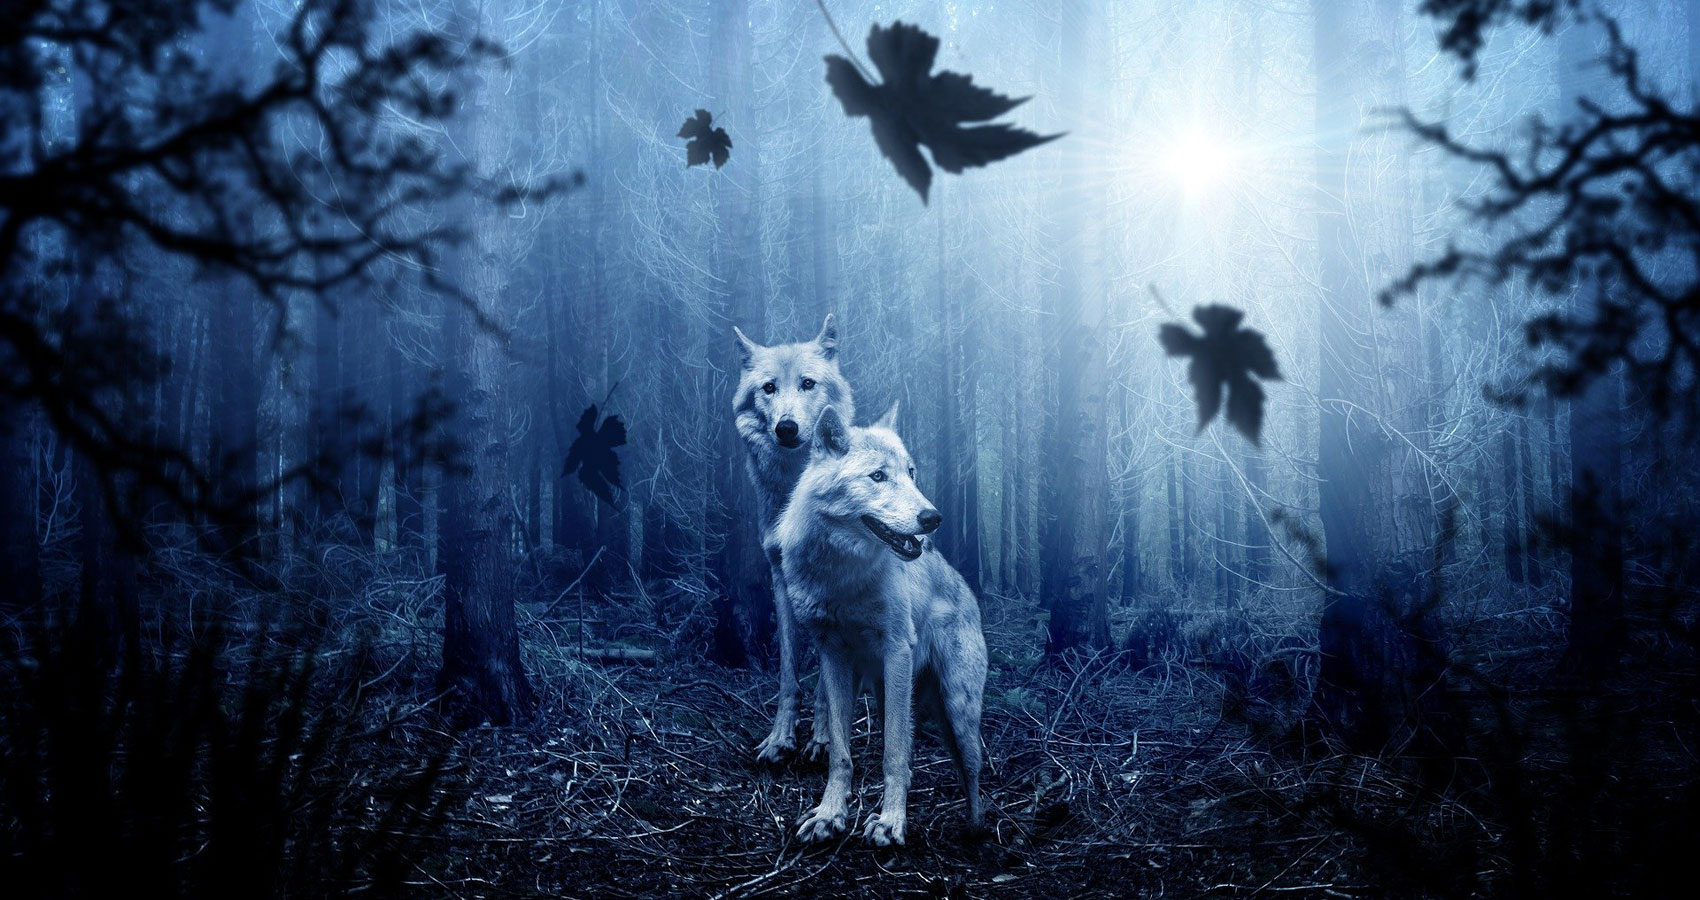 Blue Wolves Move In An Indigo Wood by Eric Robert Nolan at Spillwords.com